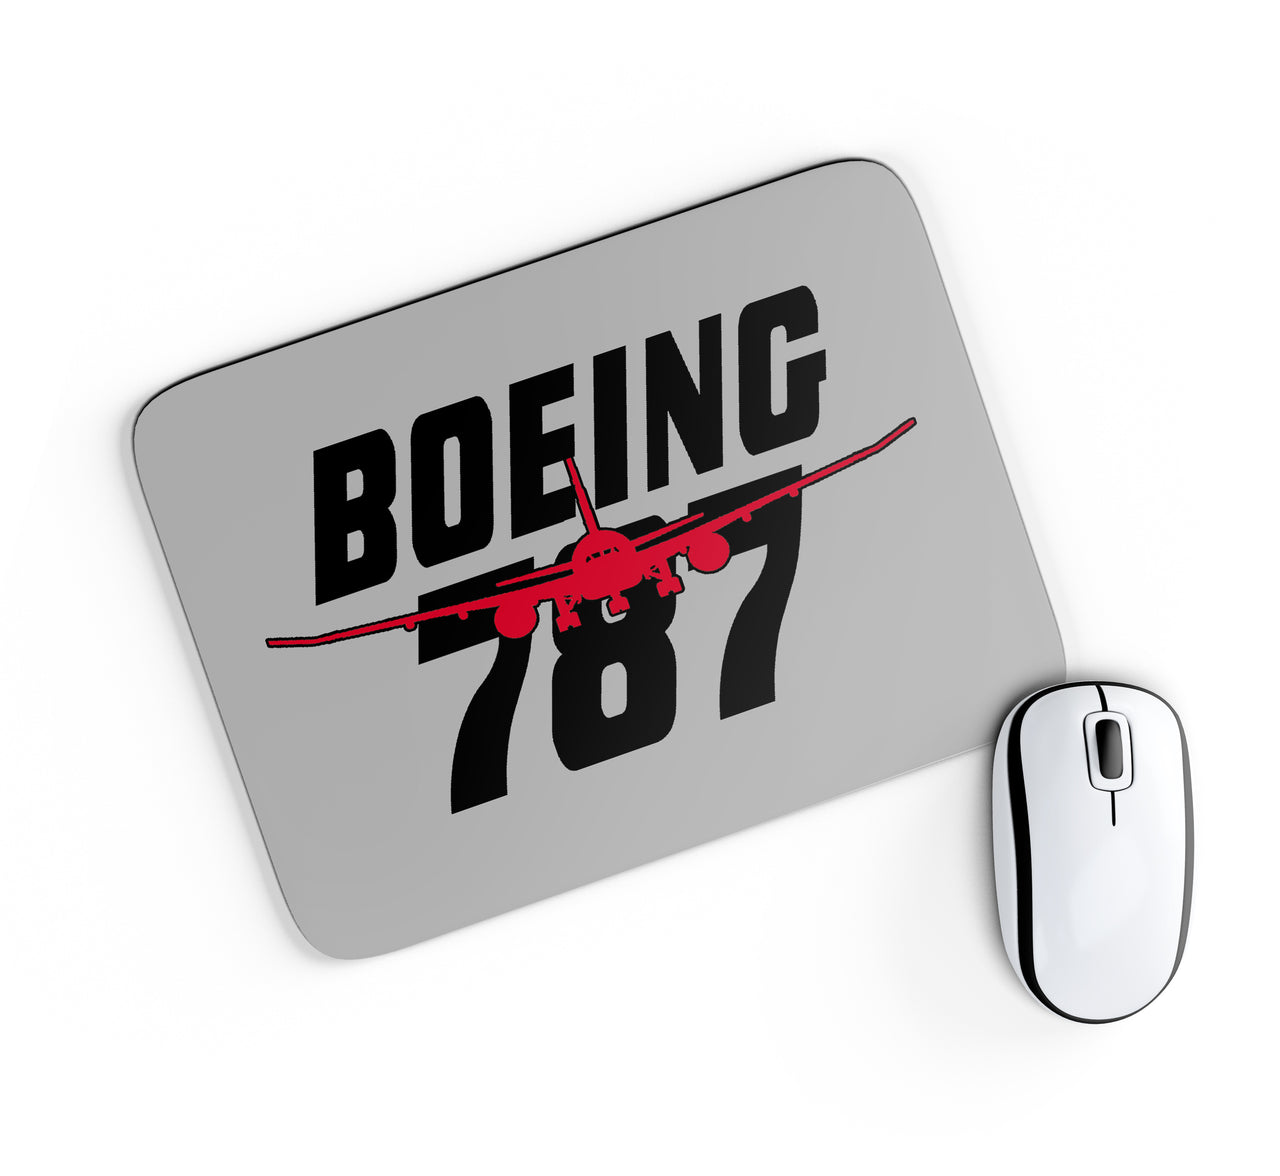 Amazing Boeing 787 Designed Mouse Pads